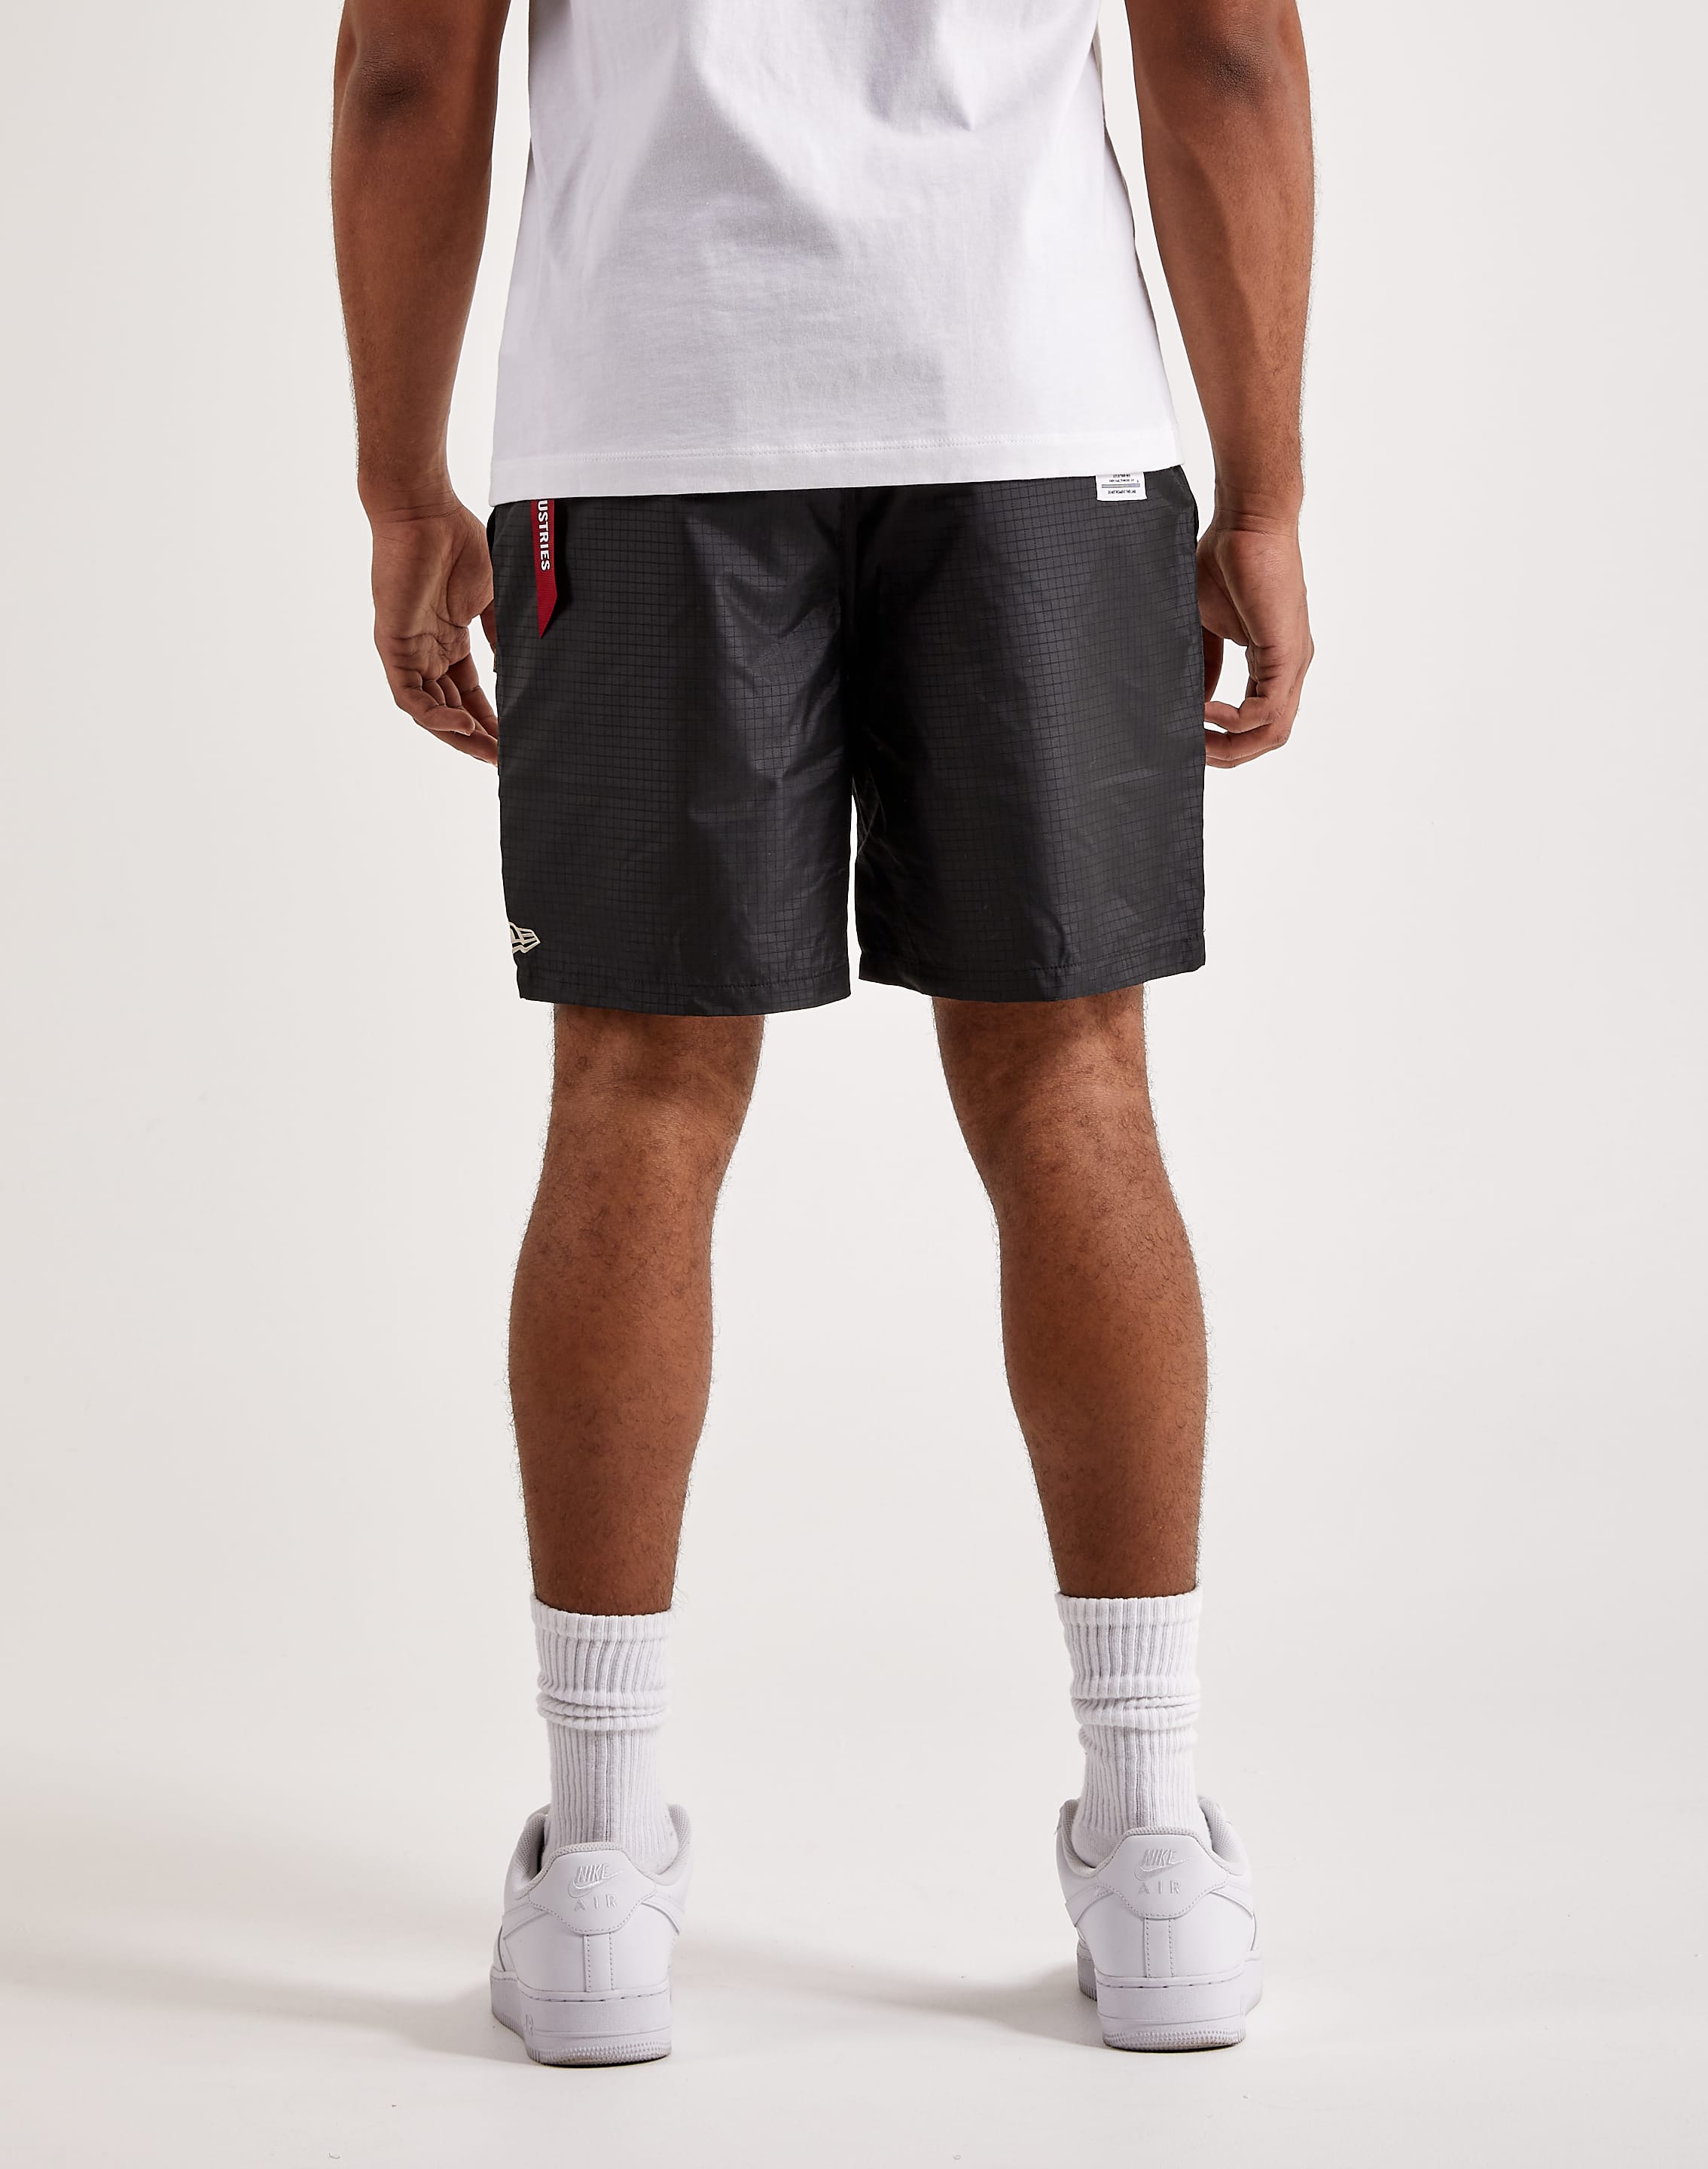 Shorts Alpha DTLR White Industries – Chicago Sox